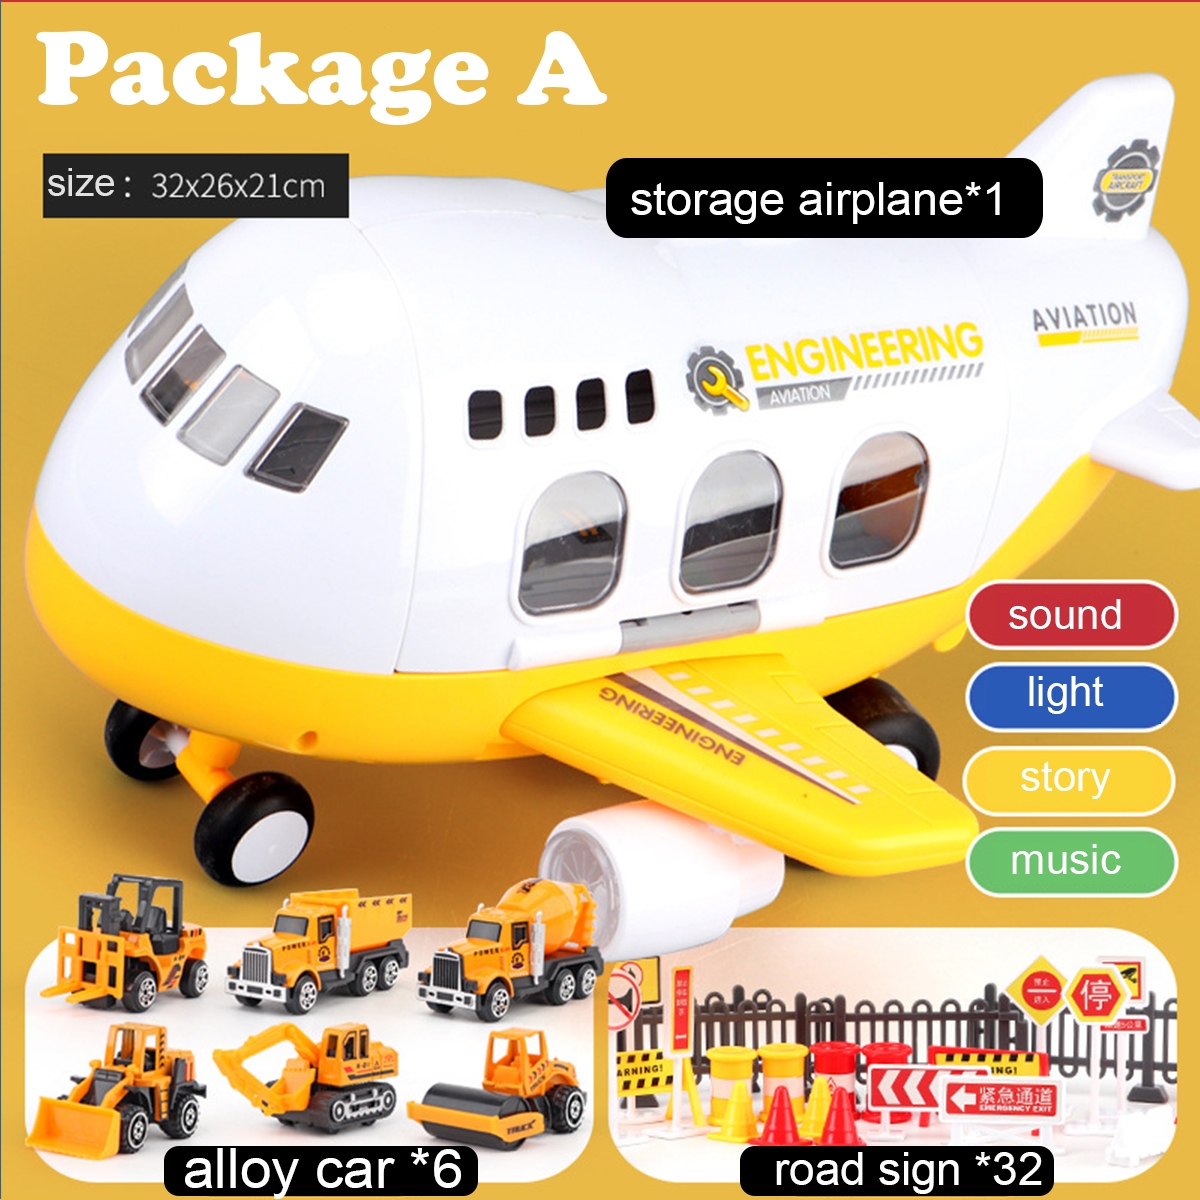 Alloy Storage Airplane Inertia Vehicle Diecast Car Model Toy with Sound Light Story Music for Kids Gift